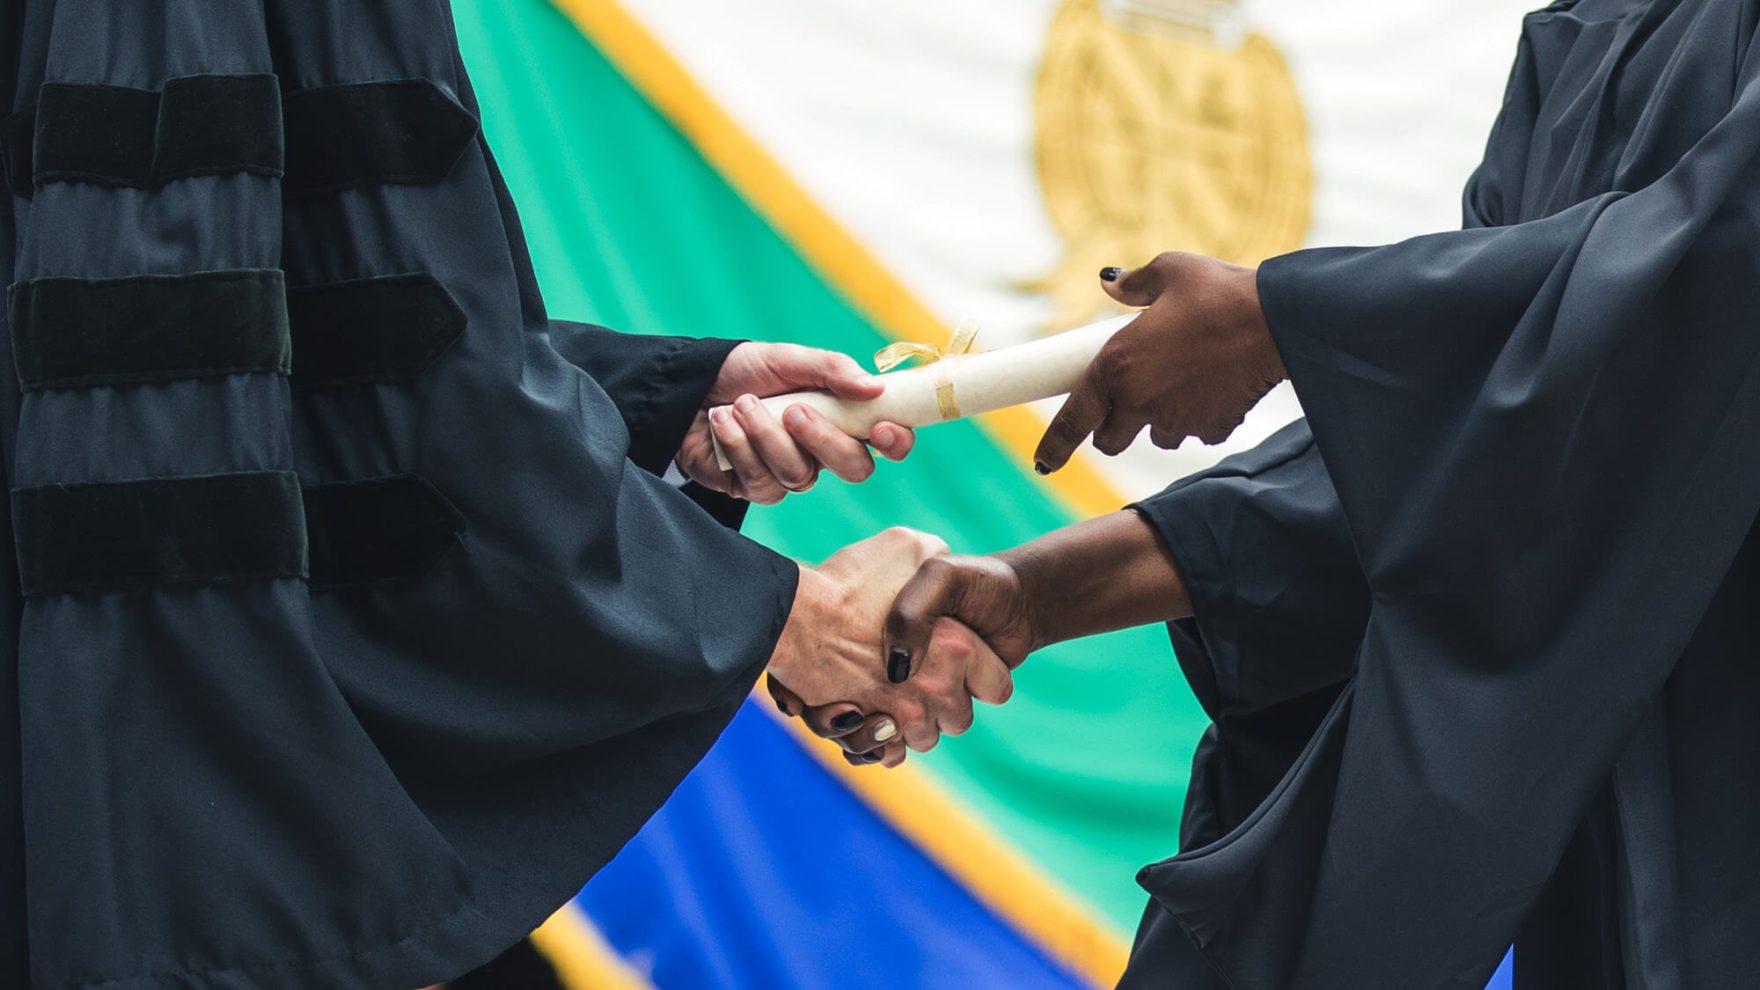 Regent graduate shaking hands while receiving diploma at University commencement ceremony.